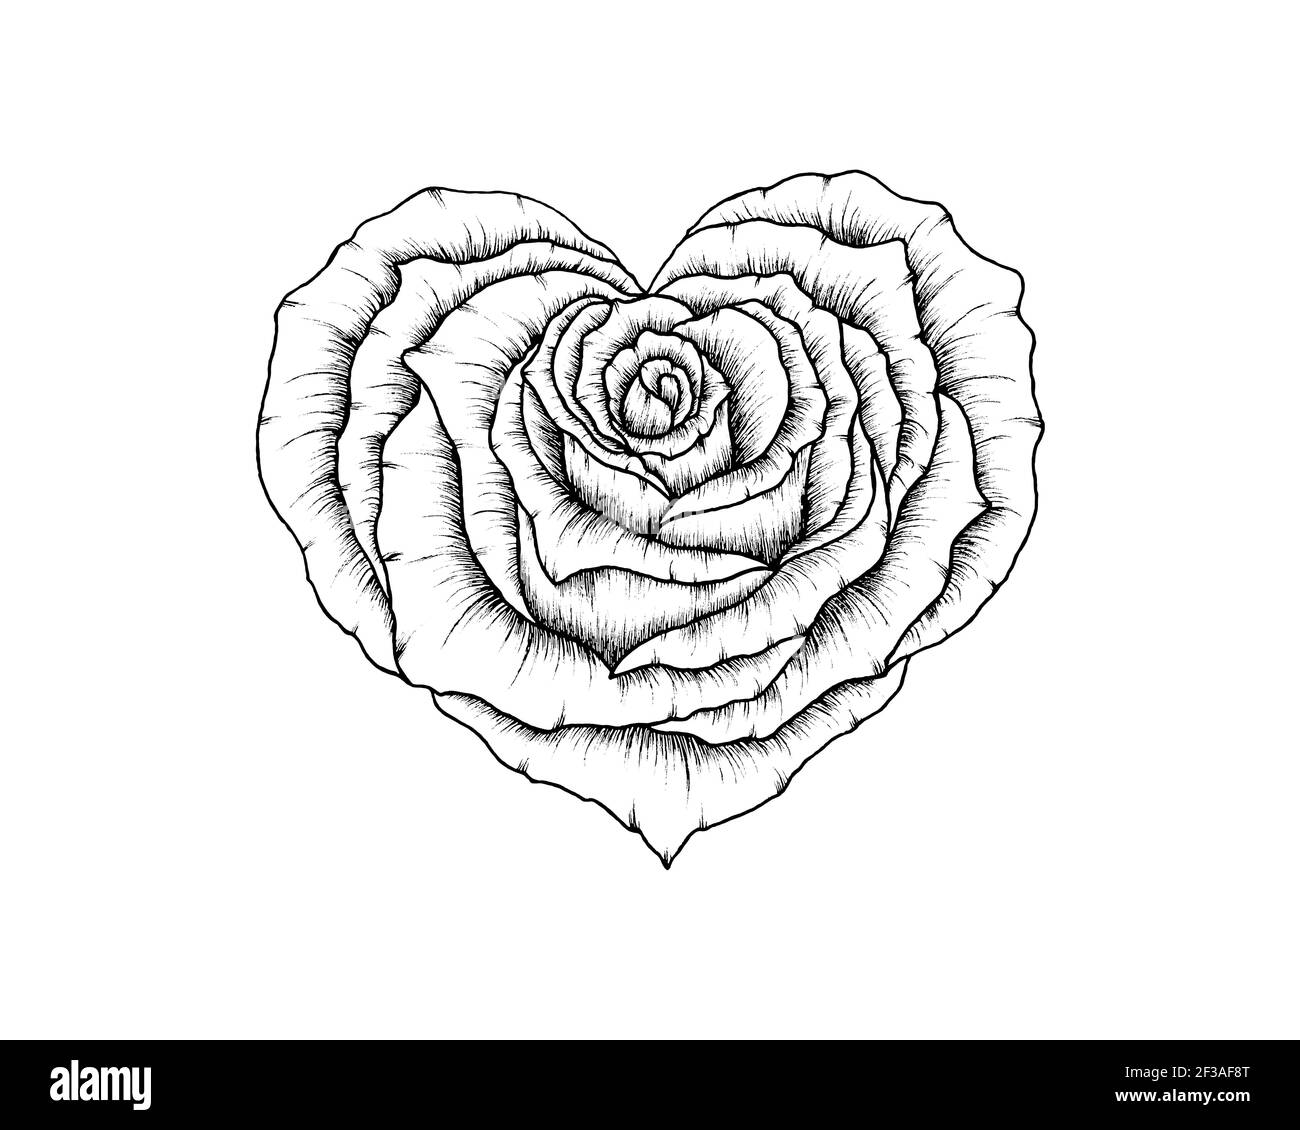 Heart of rose Black and White Stock Photos & Images - Alamy